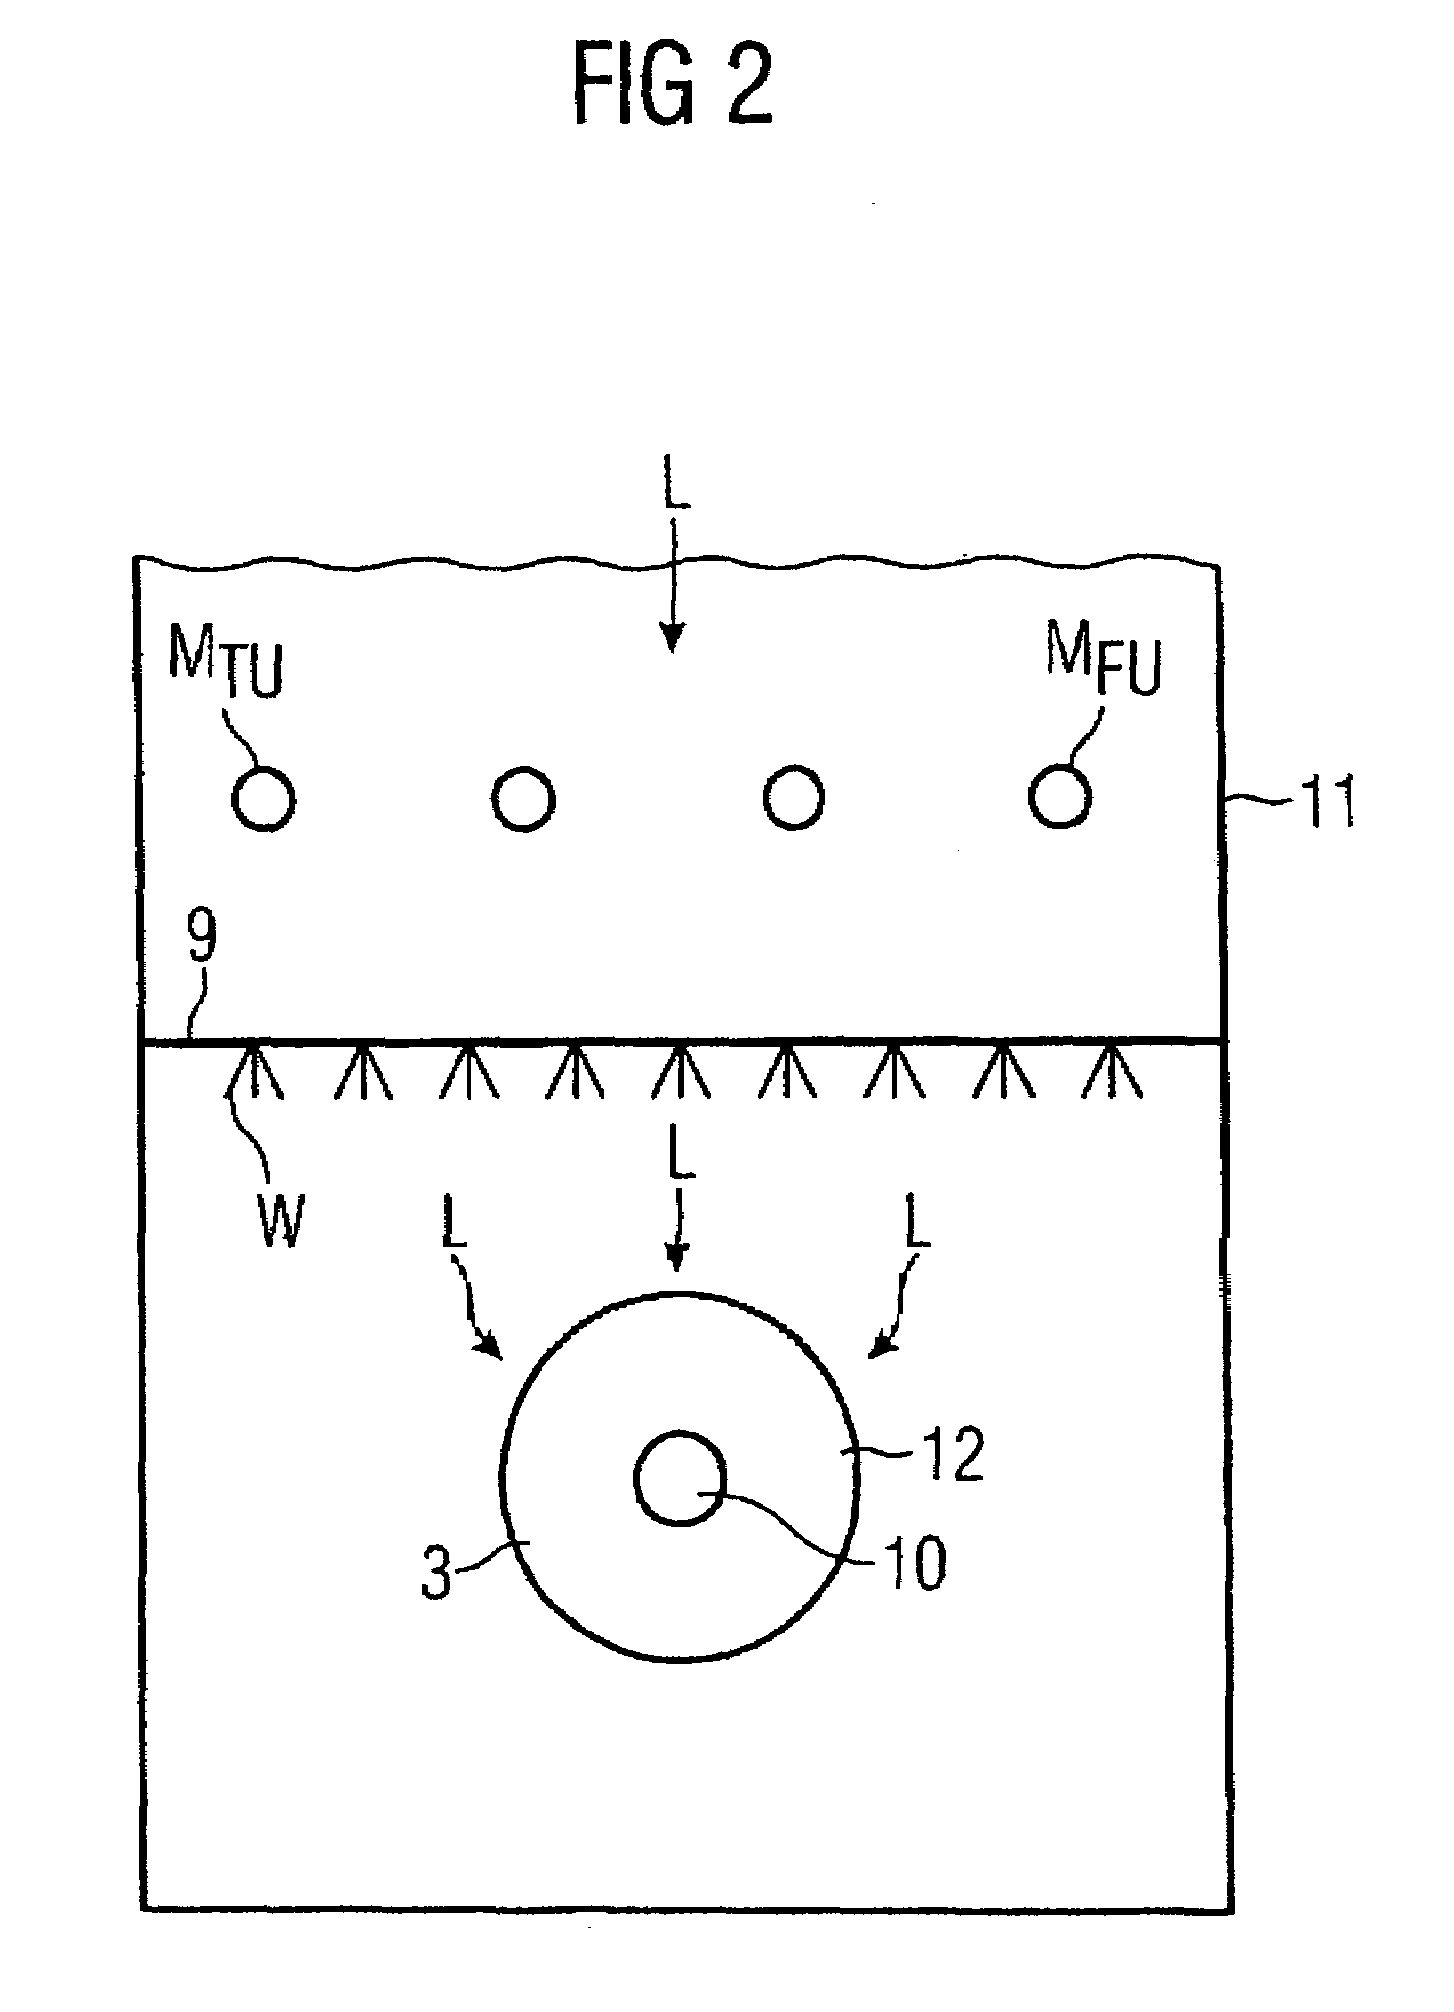 Temperature measuring device and regulation of the temperature of hot gas of a gas turbine